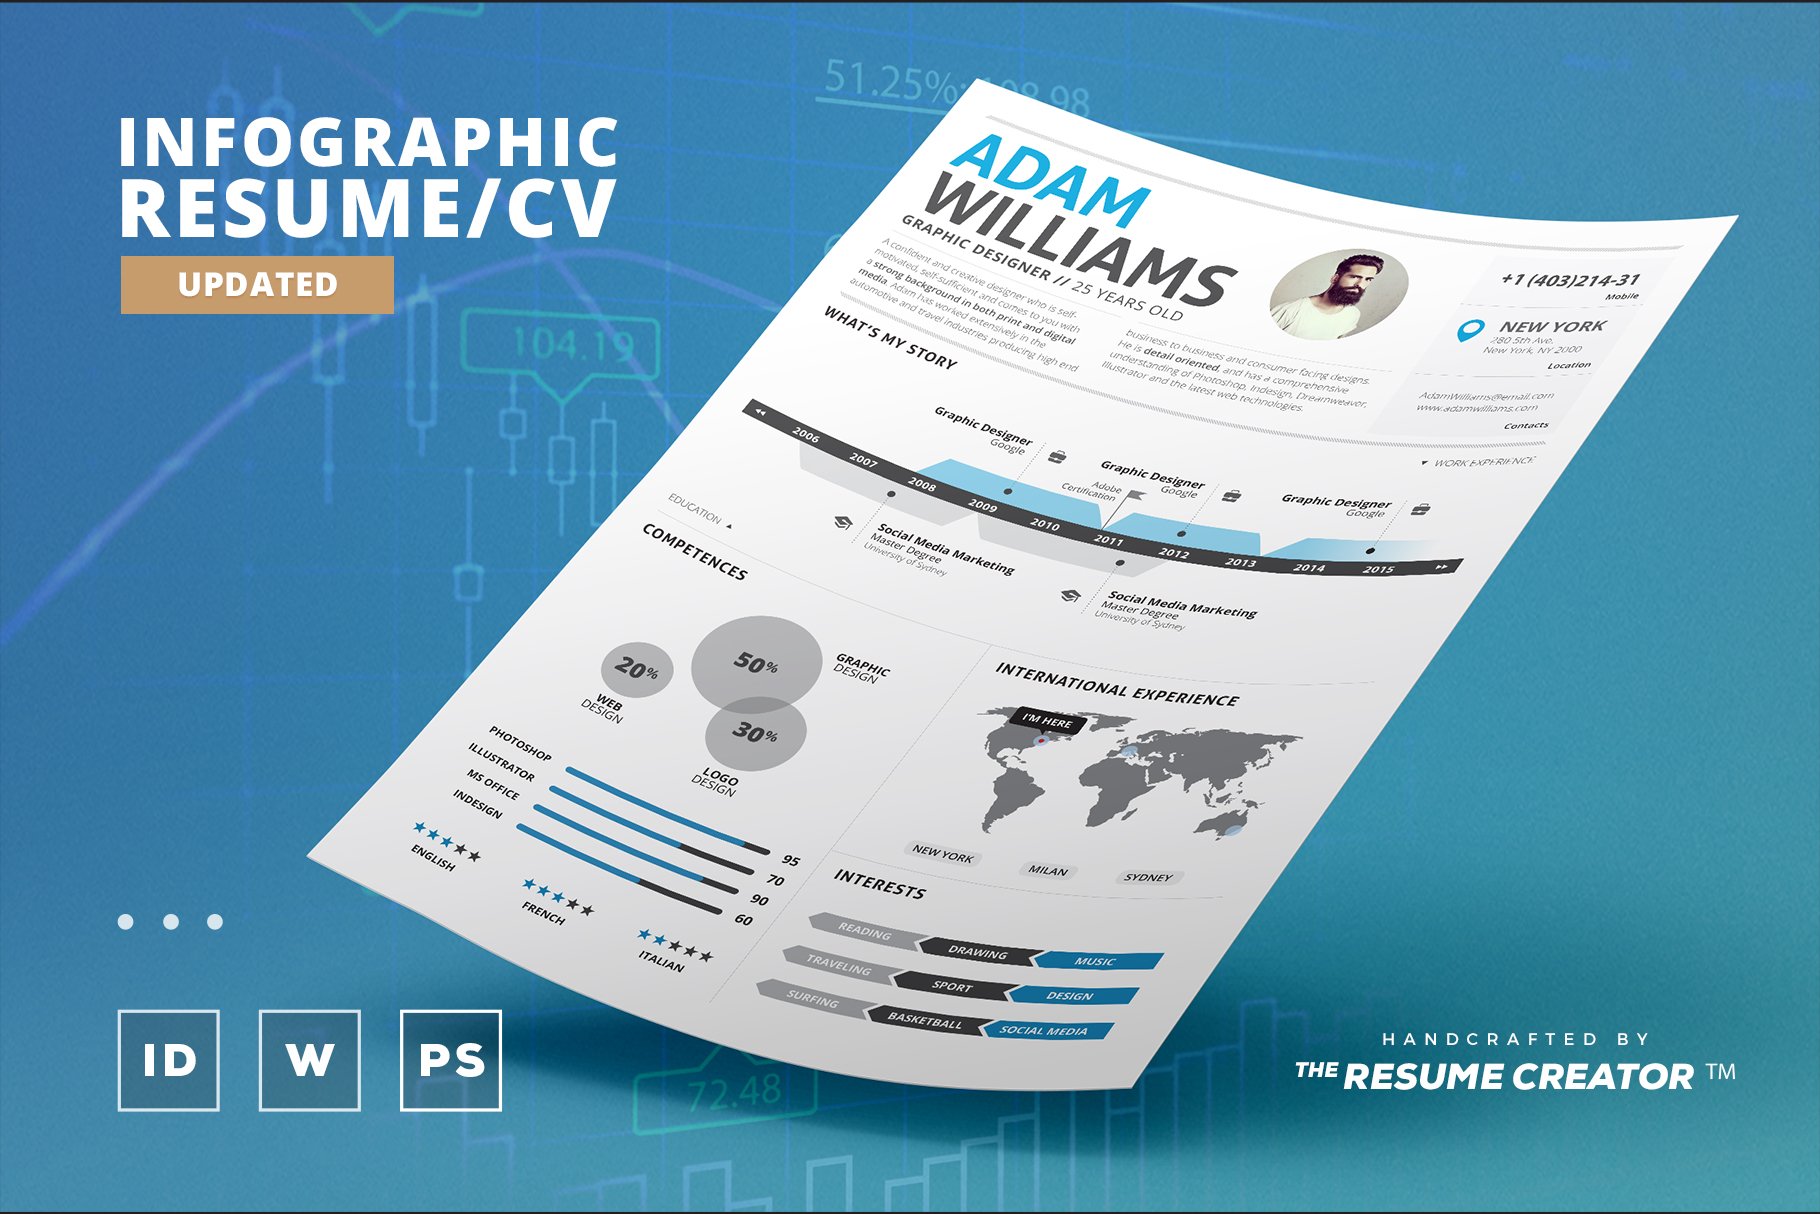 Infographic Resume/Cv Template Vol.2 cover image.